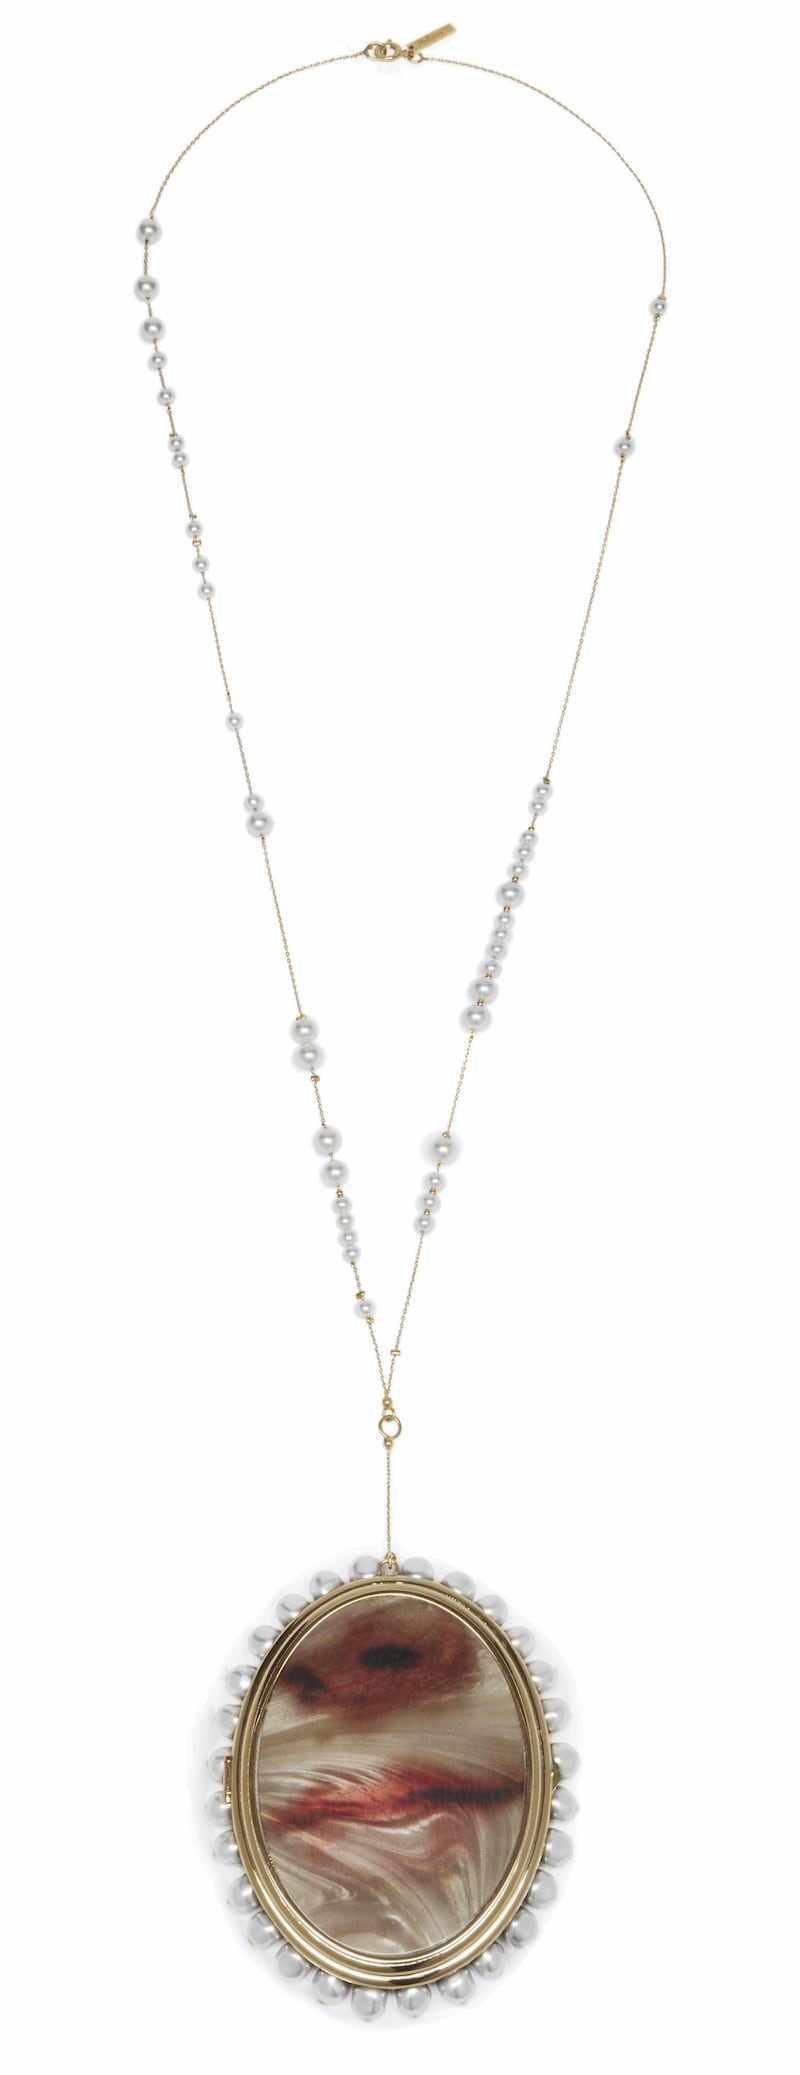 Lips are the focus of this oversized pendant, strung on a chain speckled with pearls